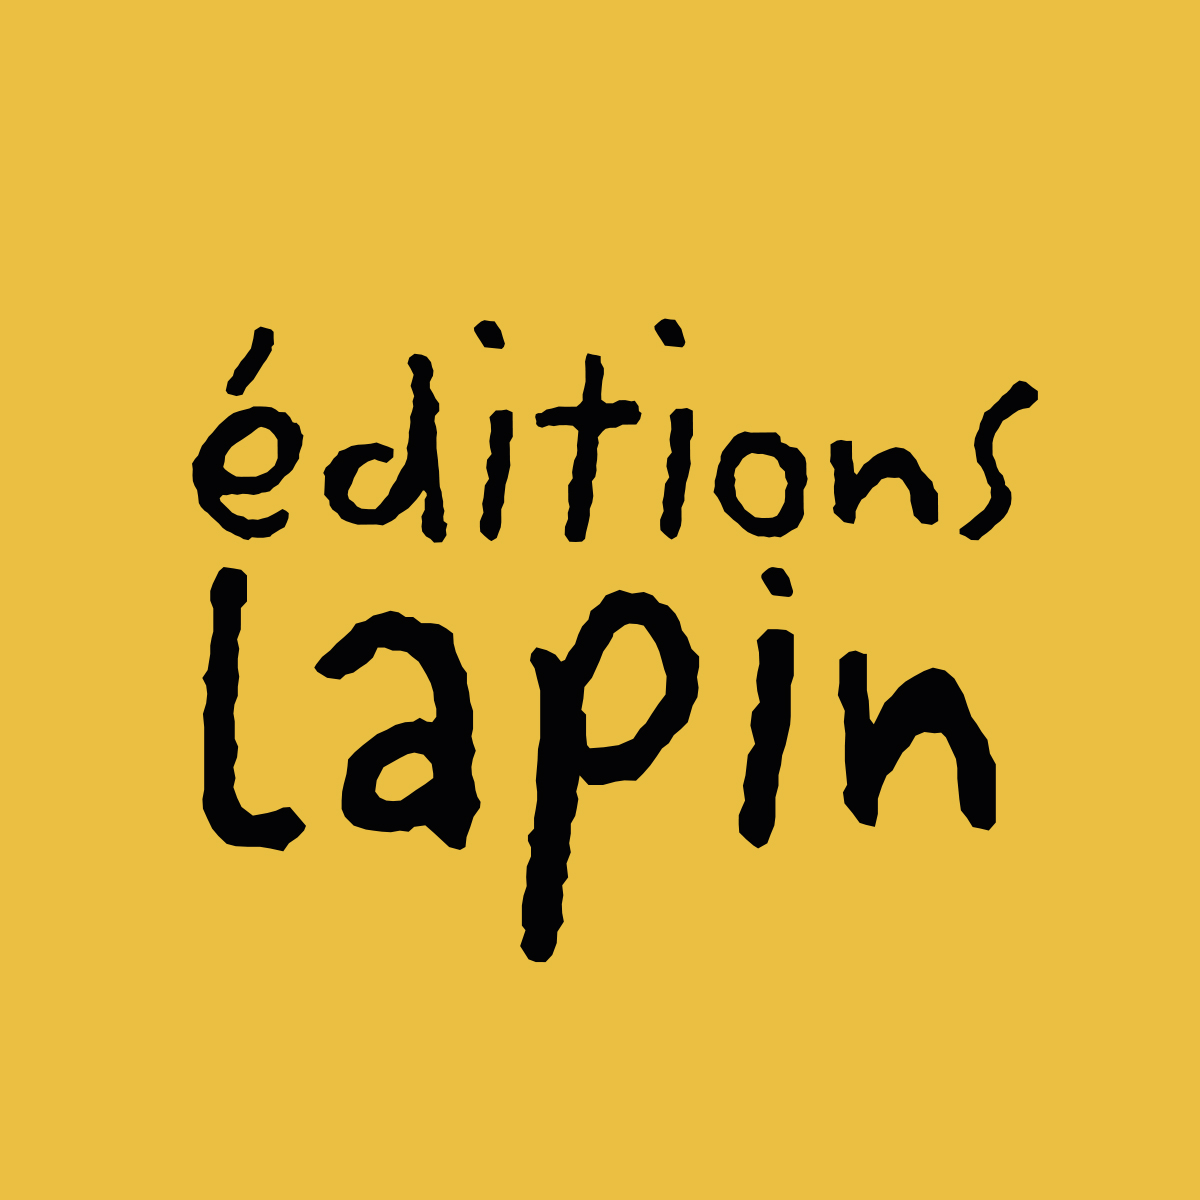 Interview Phiip – éditions lapin / Radio Canut